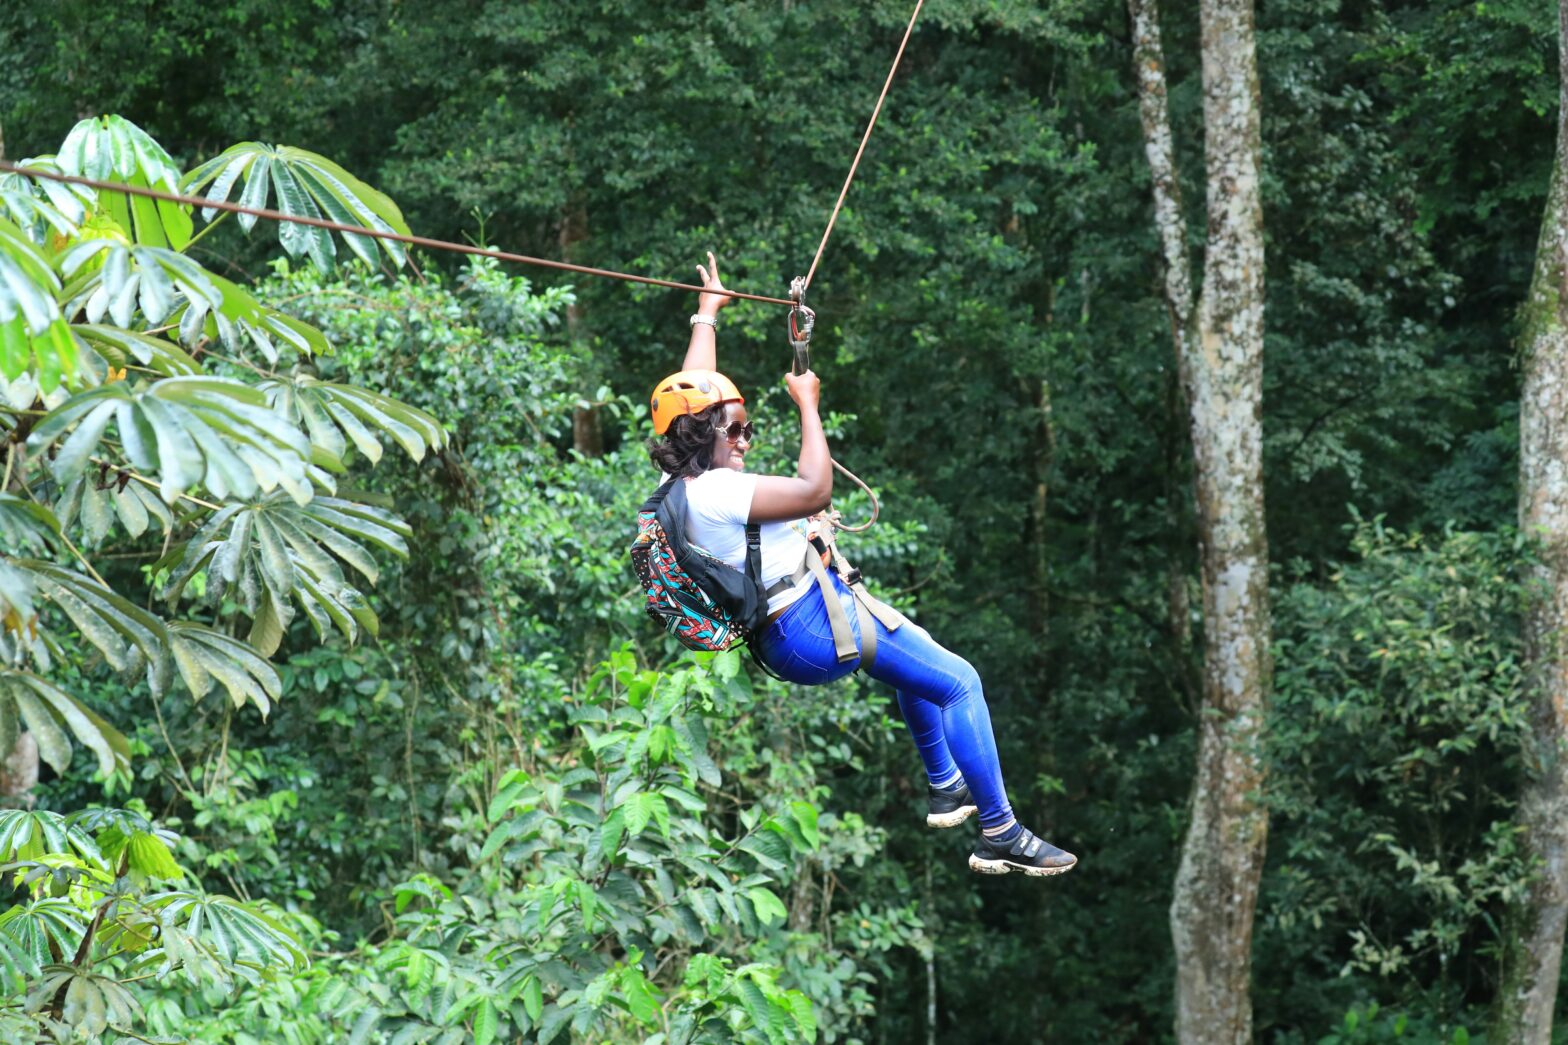 Adrenaline-Packed First Date Ends With A Viral Zip Lining Mishap